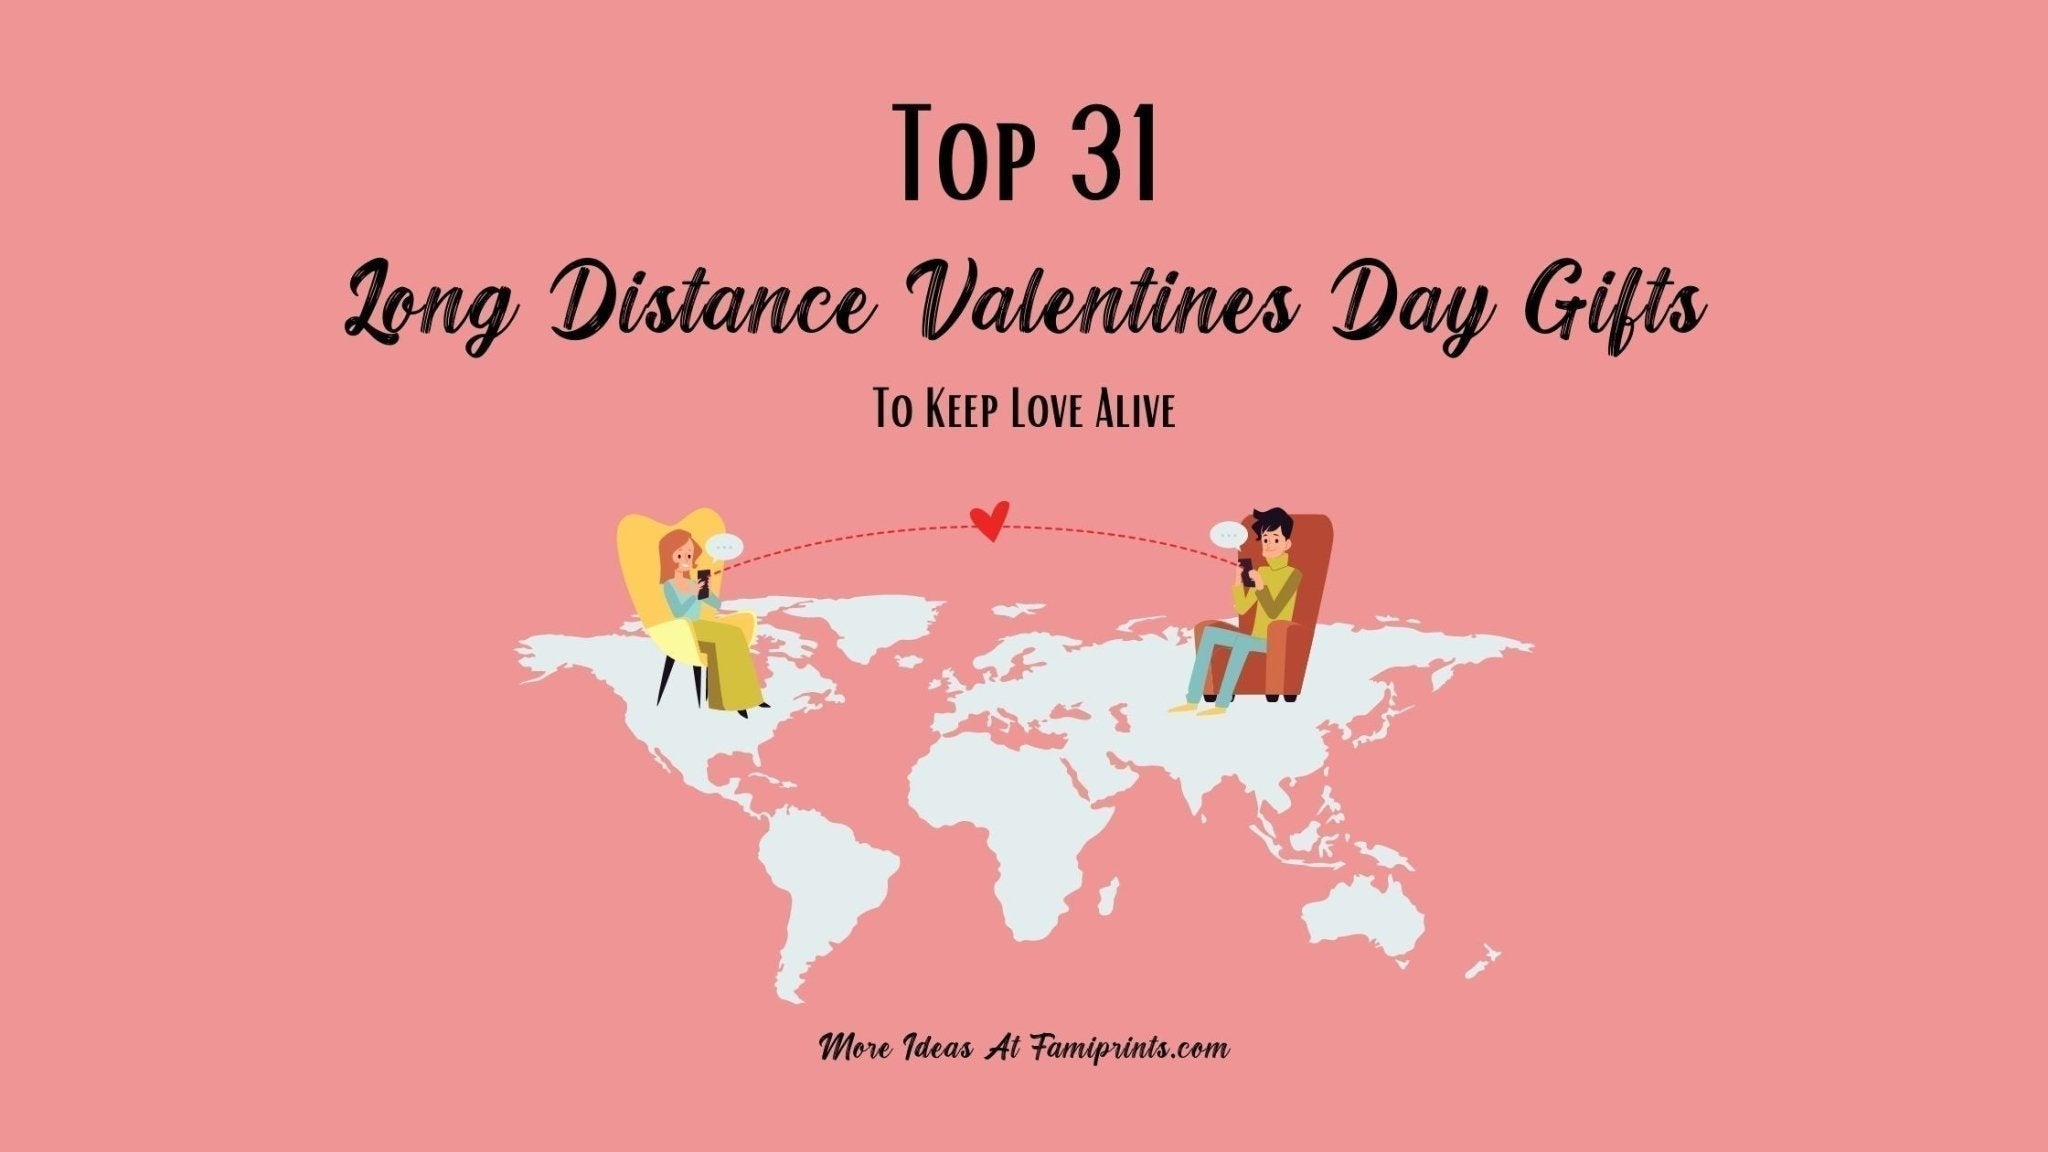 Top 31 Long Distance Valentines Day Gifts To Keep Love Alive | FamiPrints | Trending Customizable Family Gifts